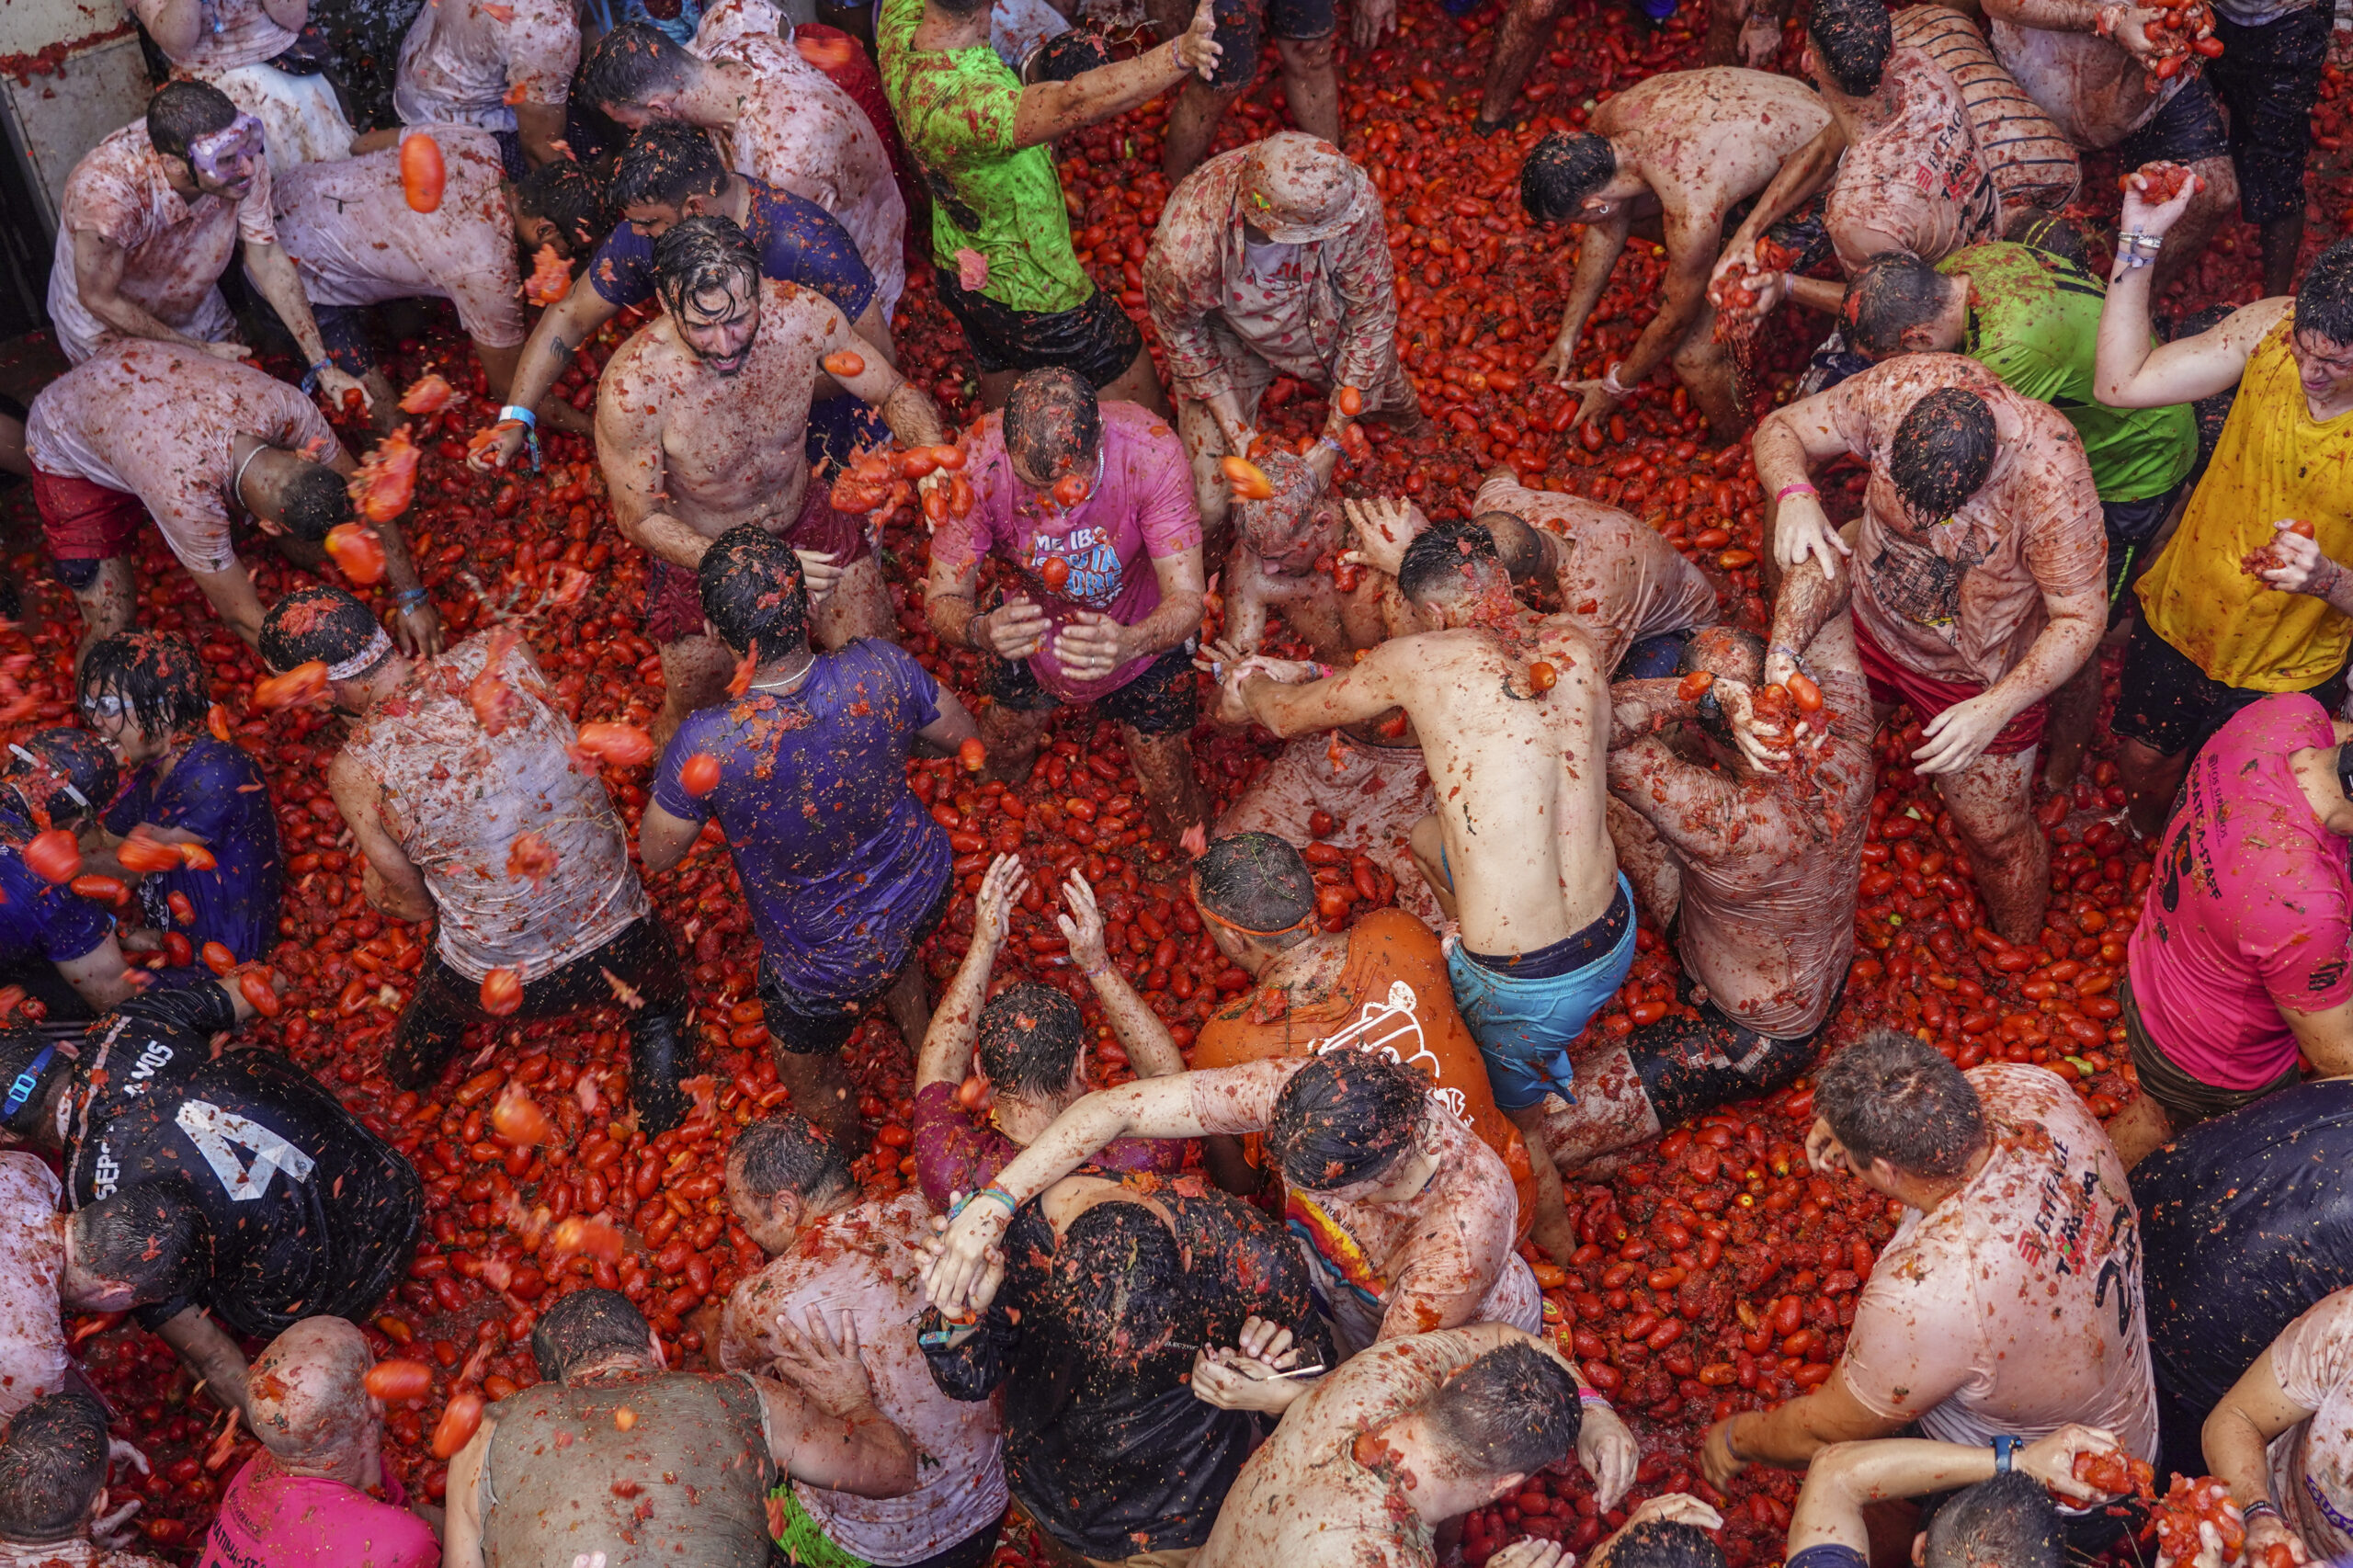 Revellers throw tomatoes at each other during the annual "Tomatina", tomato fight fiesta in the village of Bunol near Valencia, Spain, Wednesday, Aug. 31, 2022. The tomato fight took place once again following a two-year suspension owing to the coronavirus pandemic. (AP Photo/Alberto Saiz)